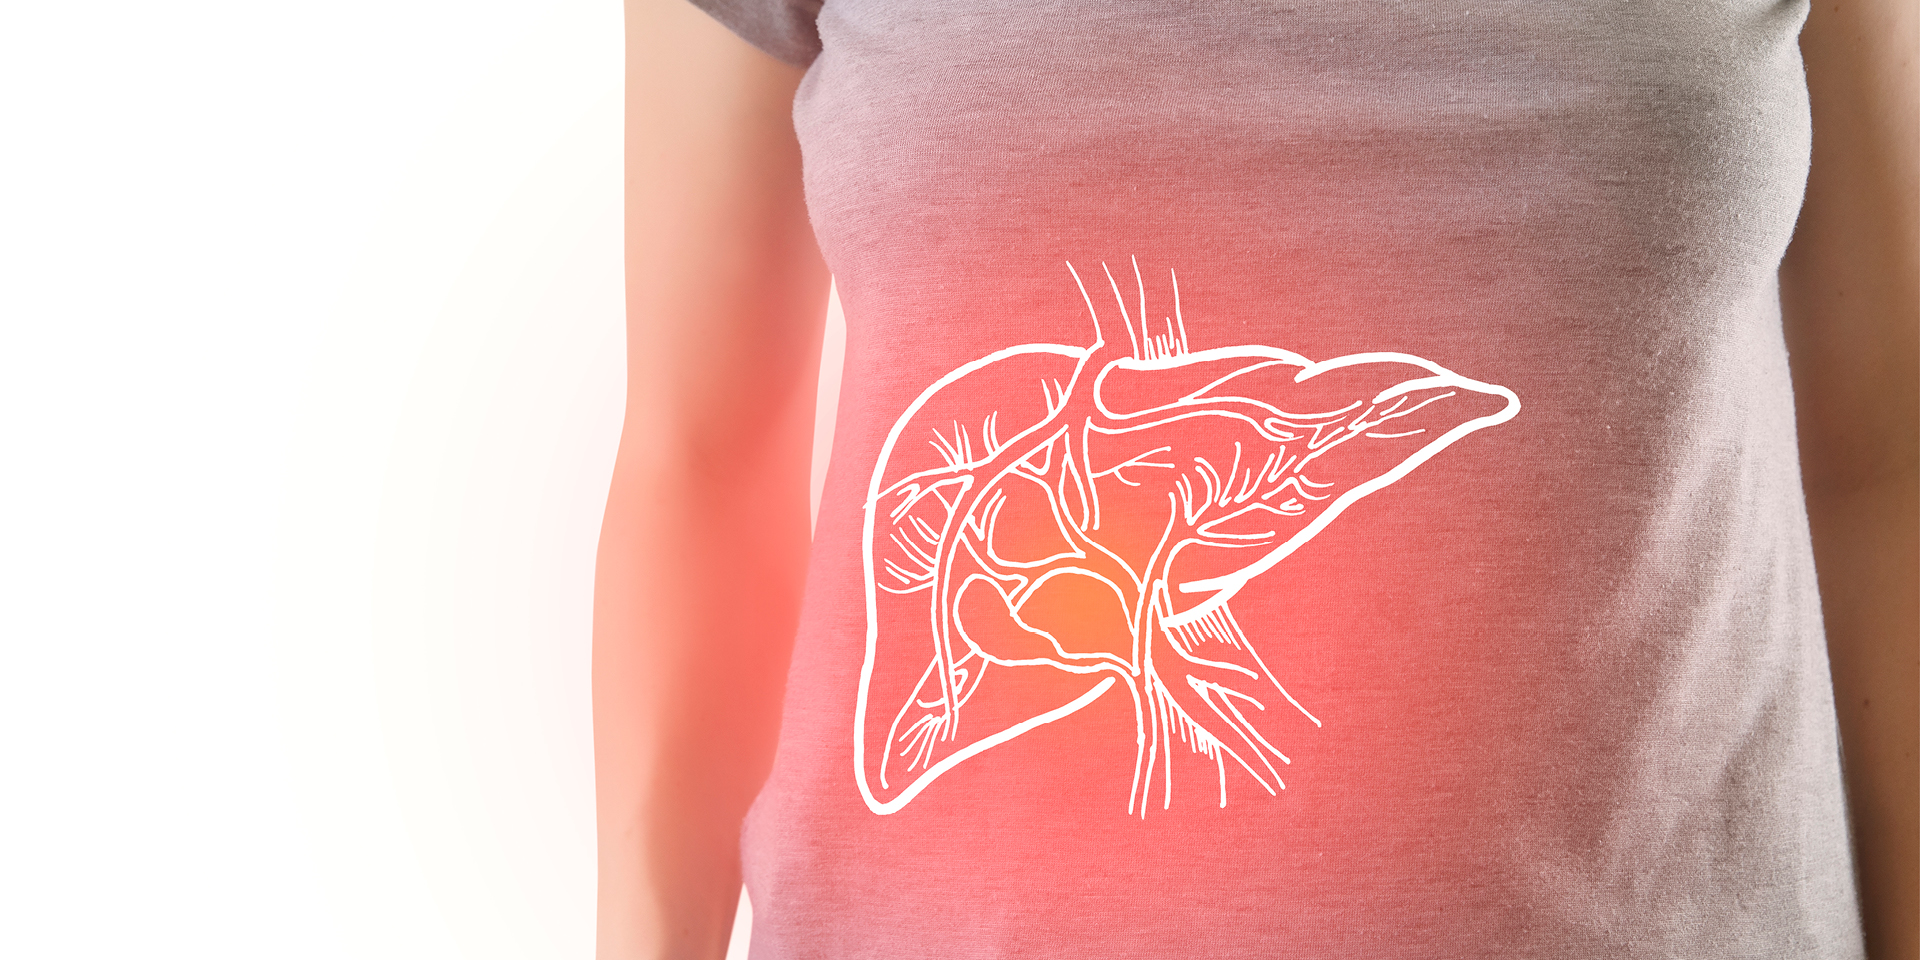 illustration of a liver superimposed on a woman's abdomen